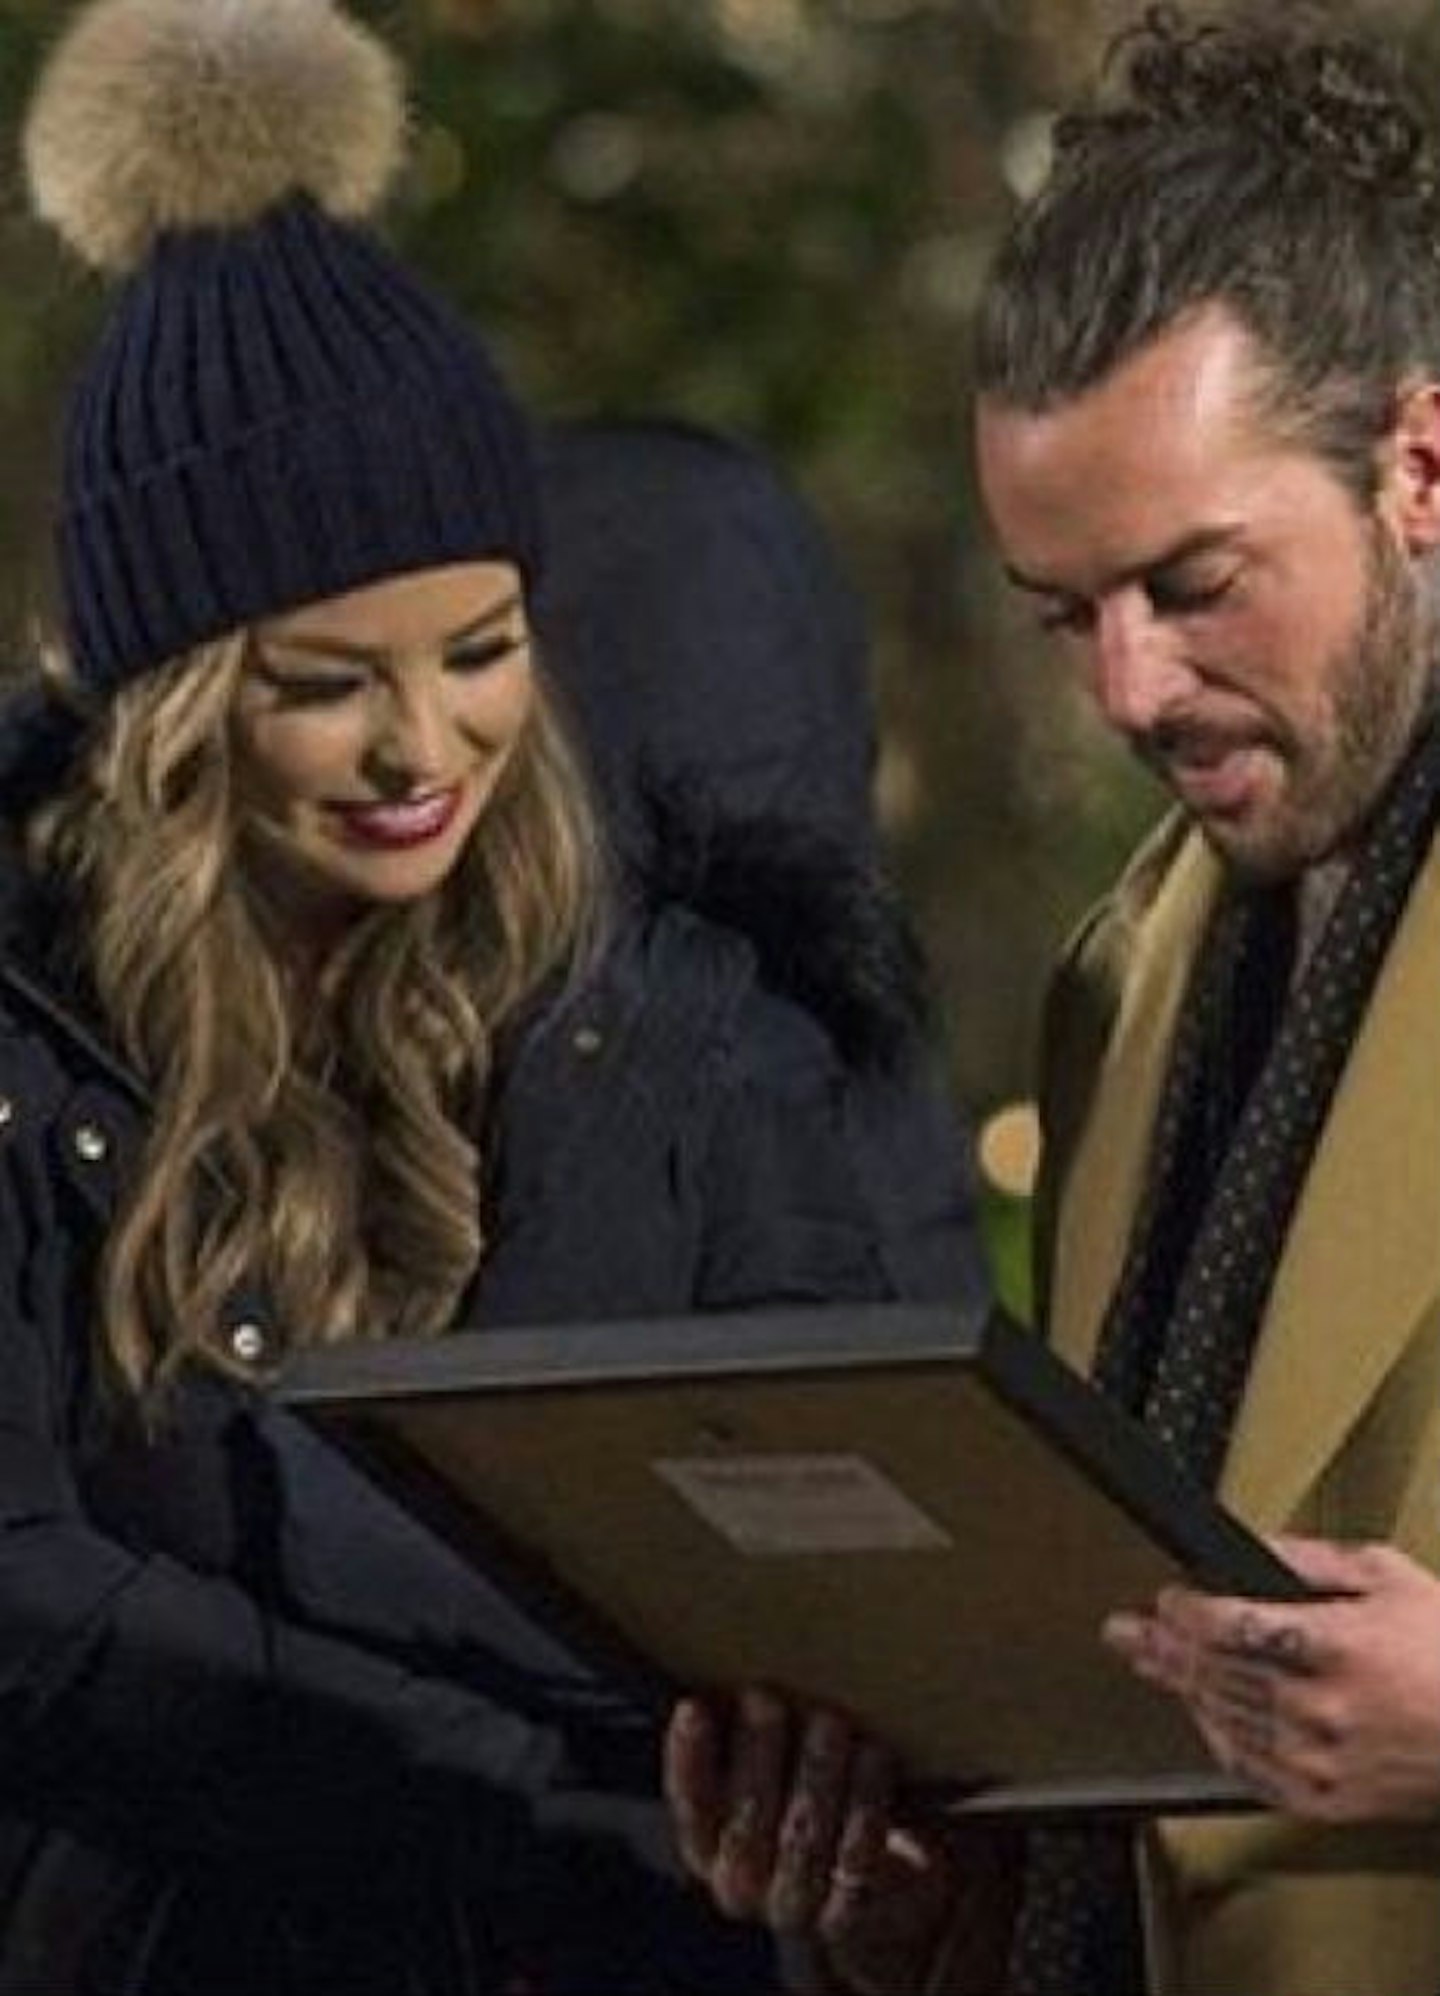 Jess has been getting close to co-star Pete Wicks